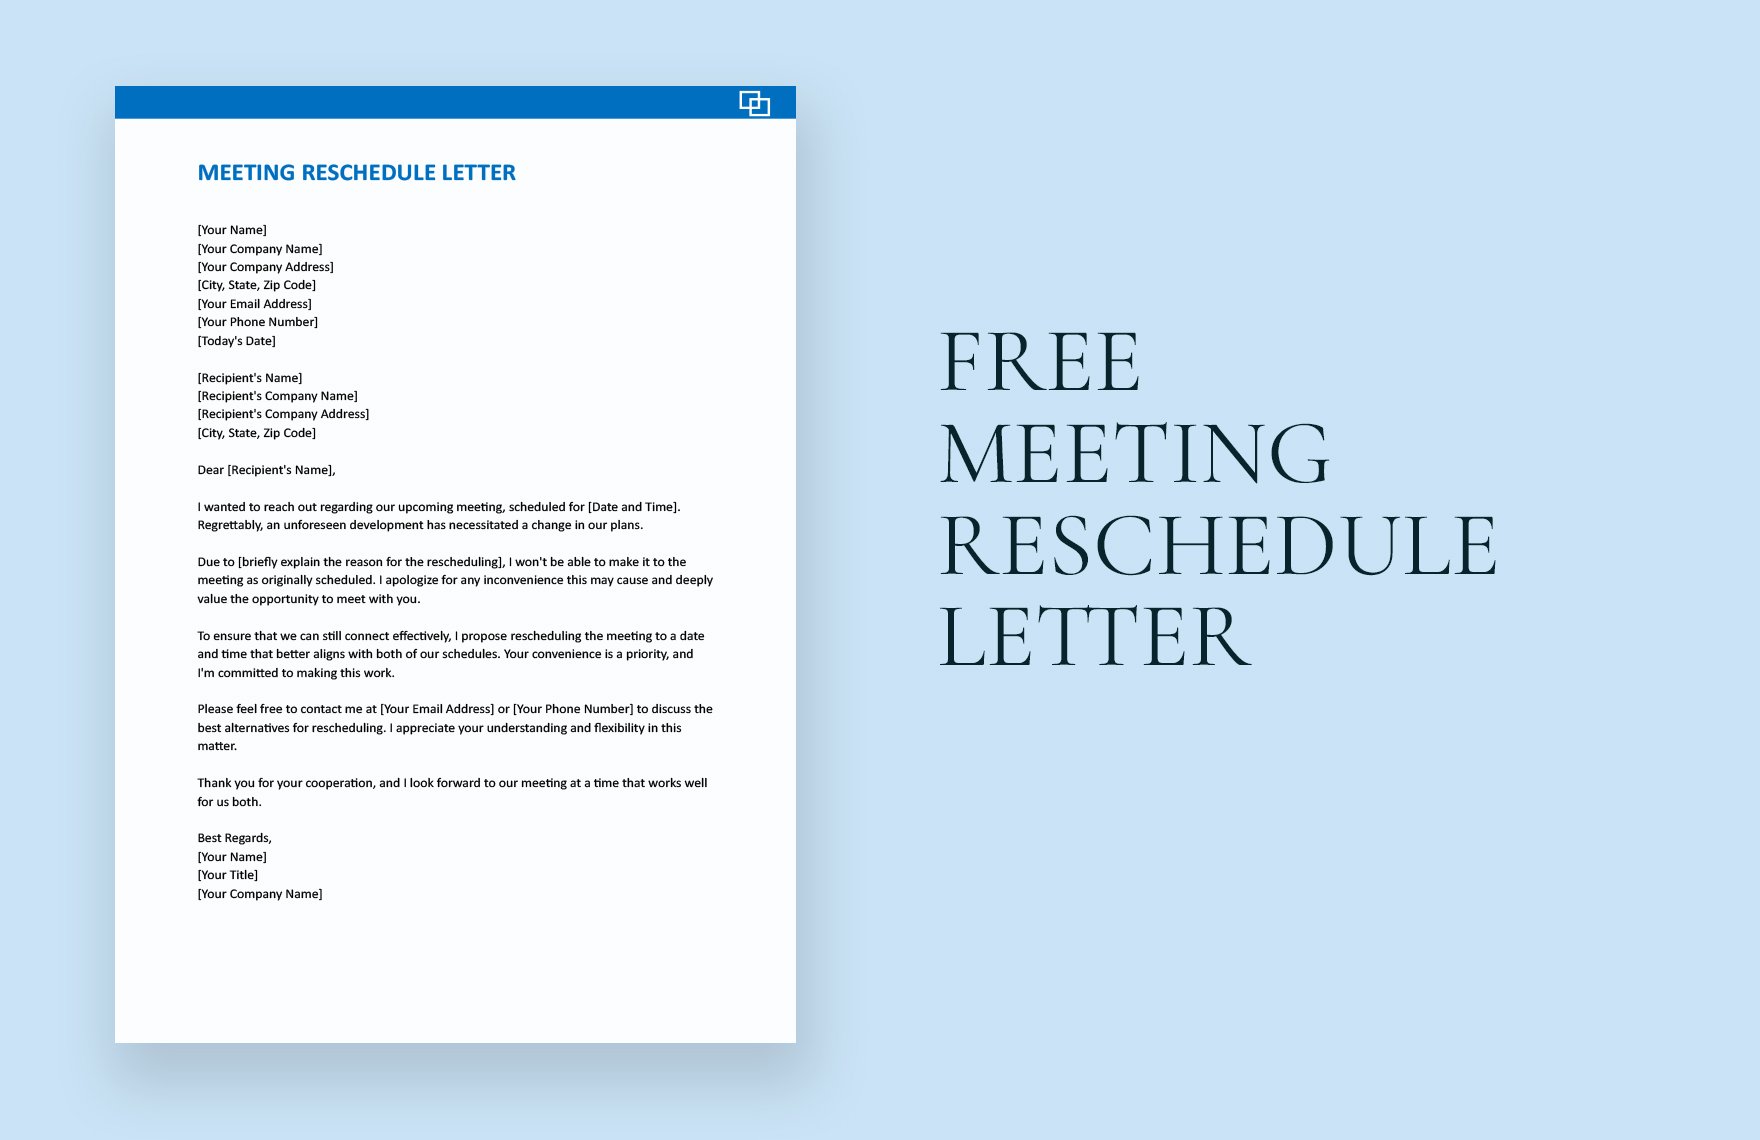 Free Meeting Reschedule Letter